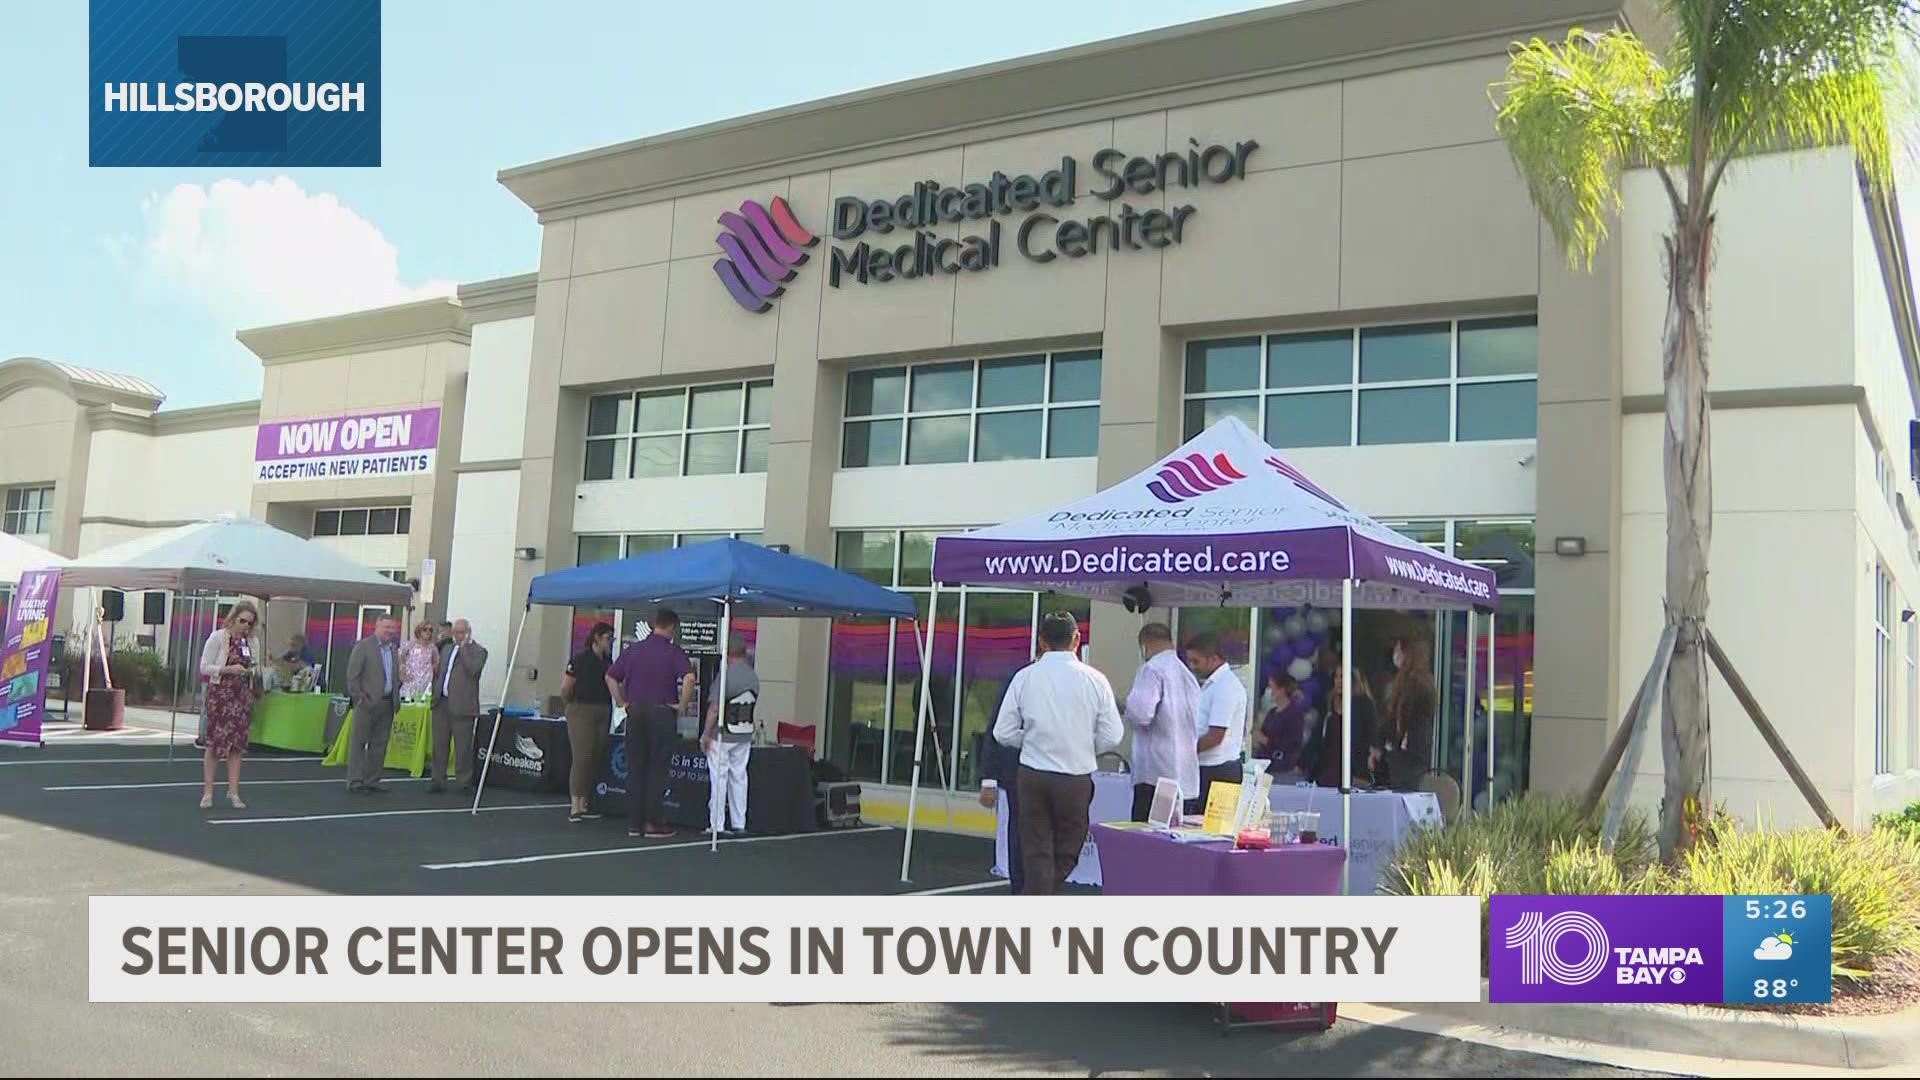 Dedicated Senior Medical Center opened on Anderson Road in Town 'n' Country and plans to offer affordable care to underserved seniors around the Tampa Bay region.